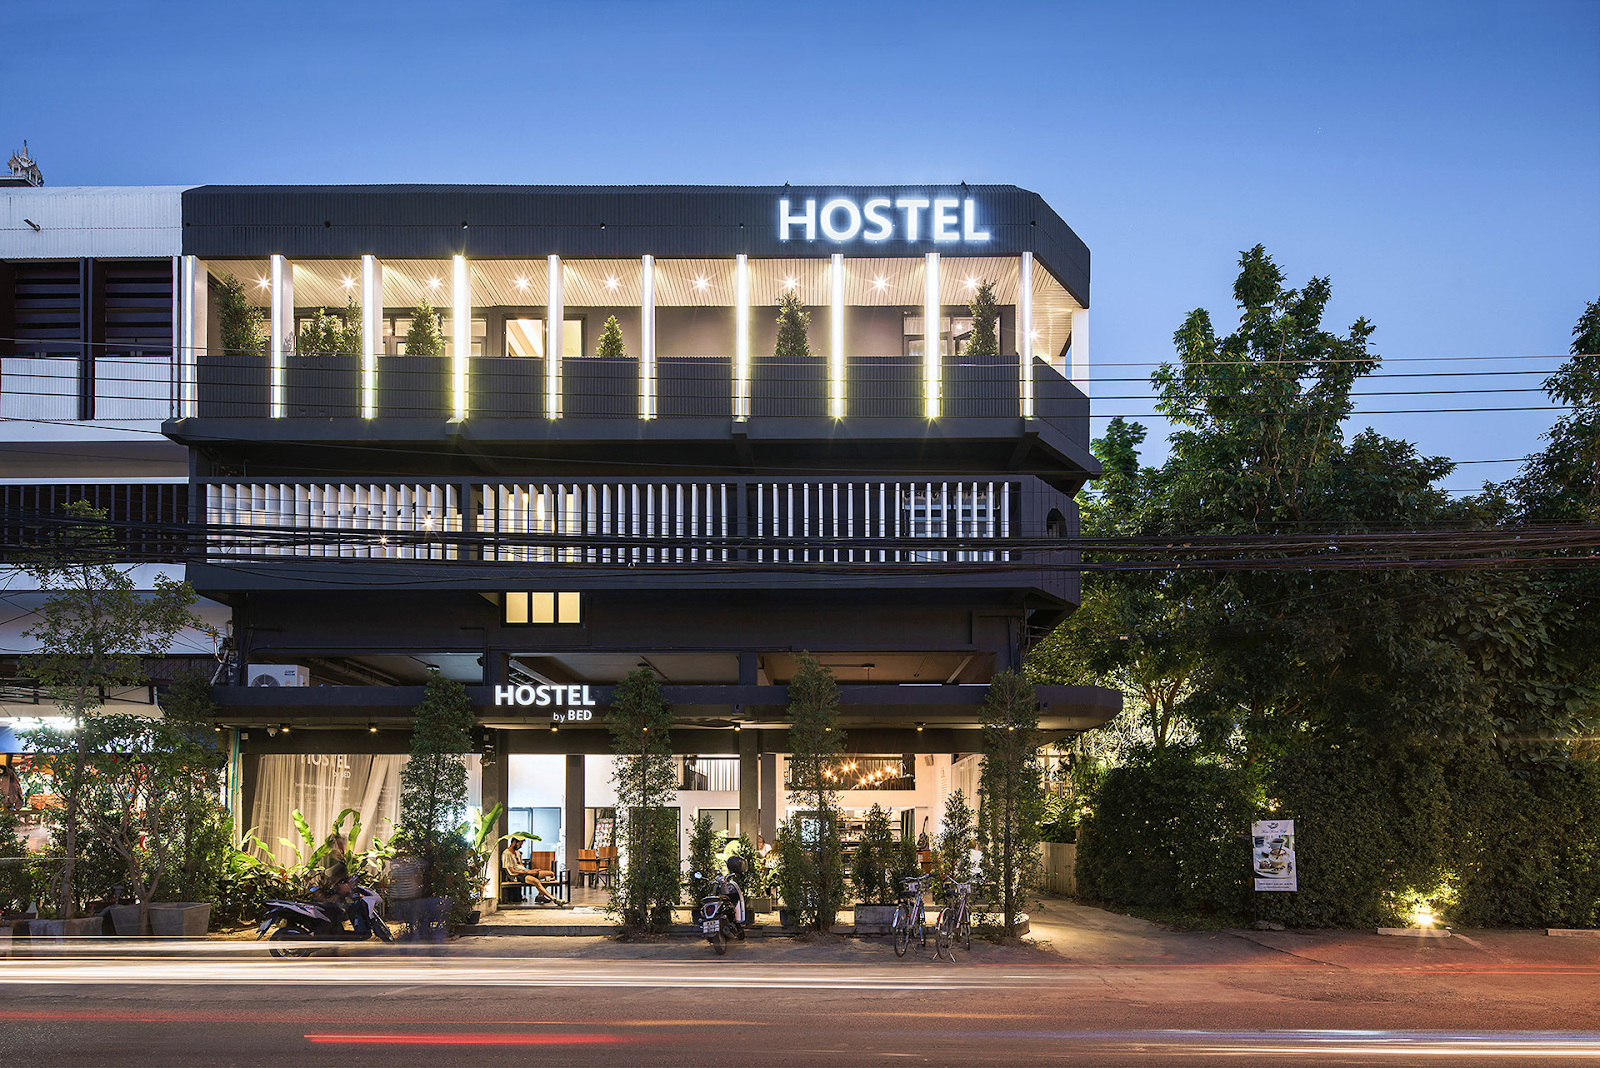 Hostel by Bed, Chiang Mai. A popular budget hostel option for digital nomads in Chiang Mai. 